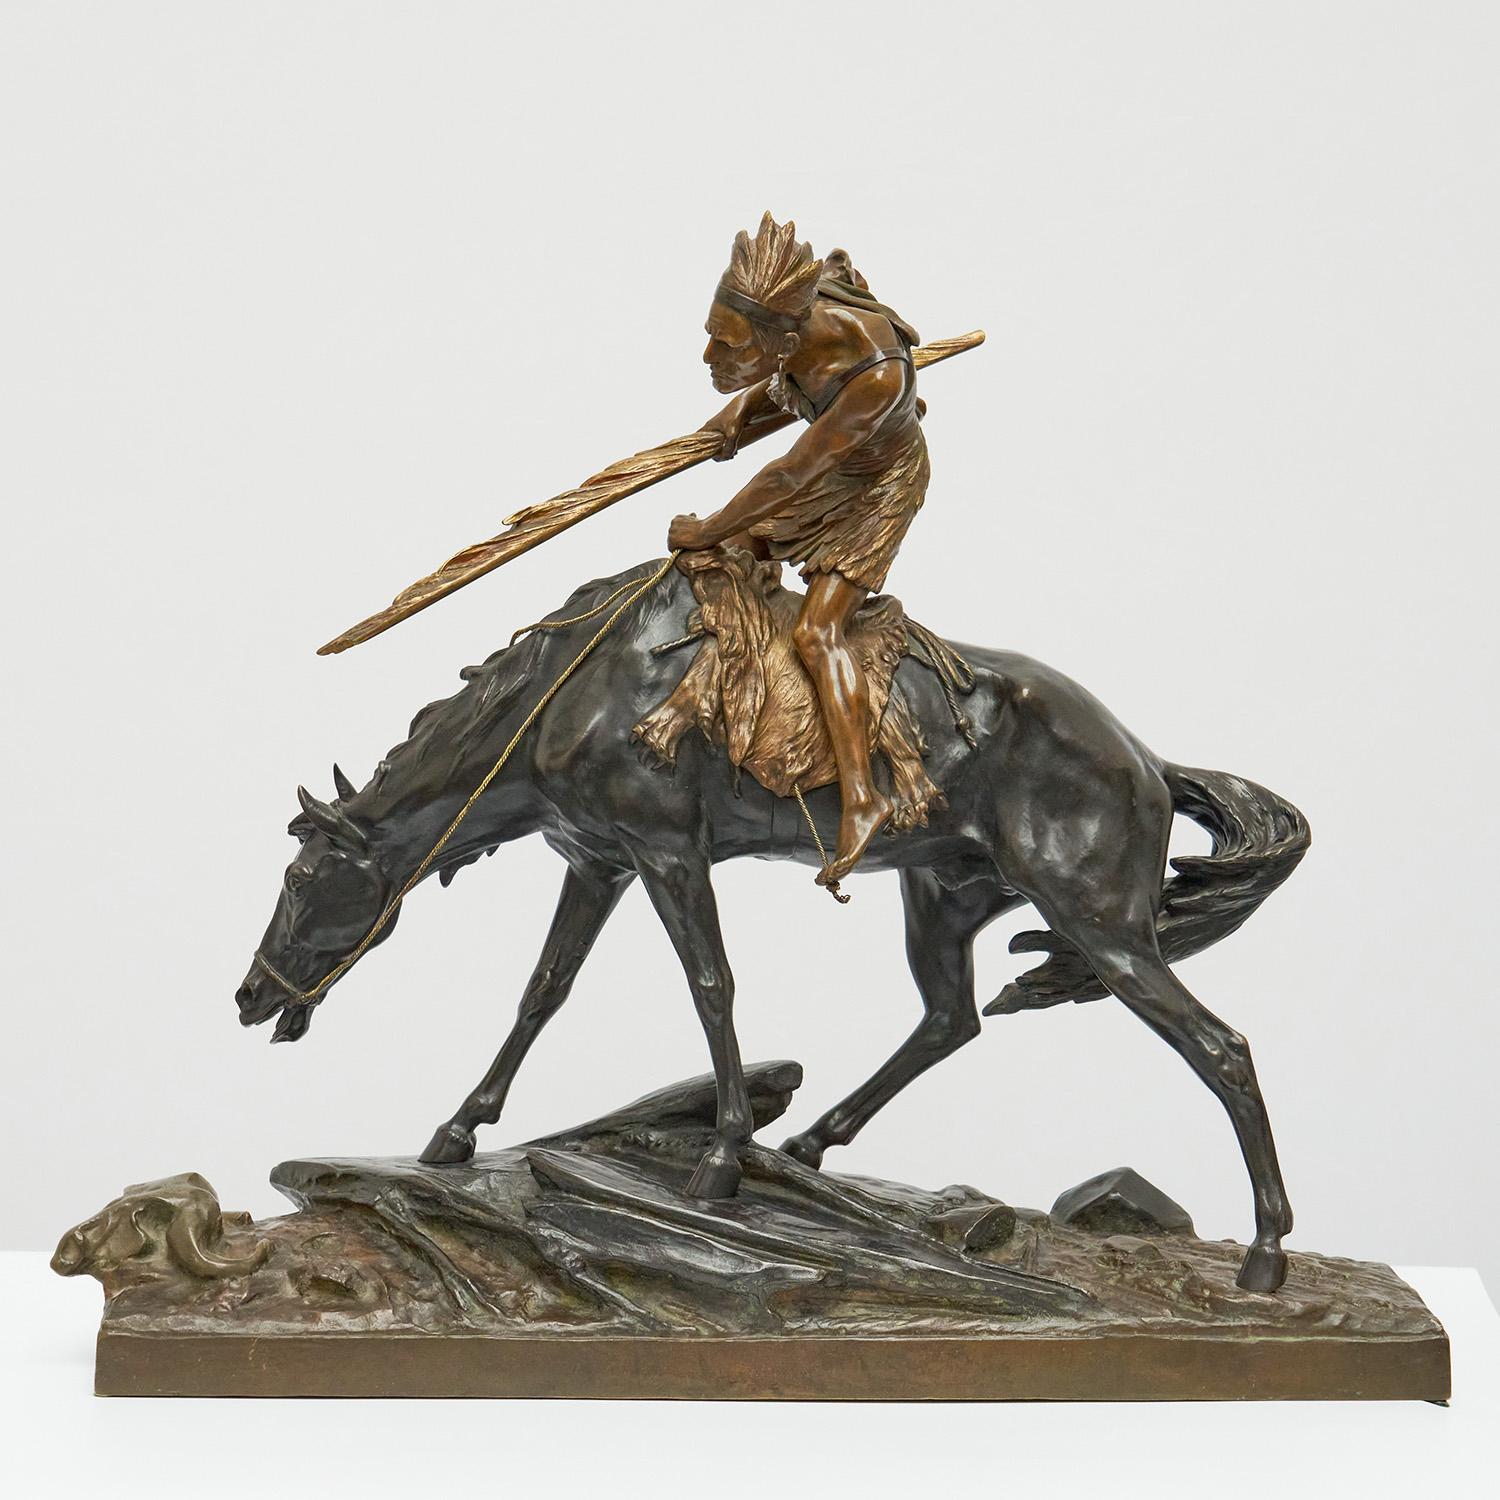 A patinated bronze sculpture of a Native American warrior on horseback by Èdouard Drouot (1859-1945). Signed E. Drouot to base with foundry 'Etling Paris' to side. 

Edouard Drouot was a French sculptor born in Sommervoire in the Haut Marne region